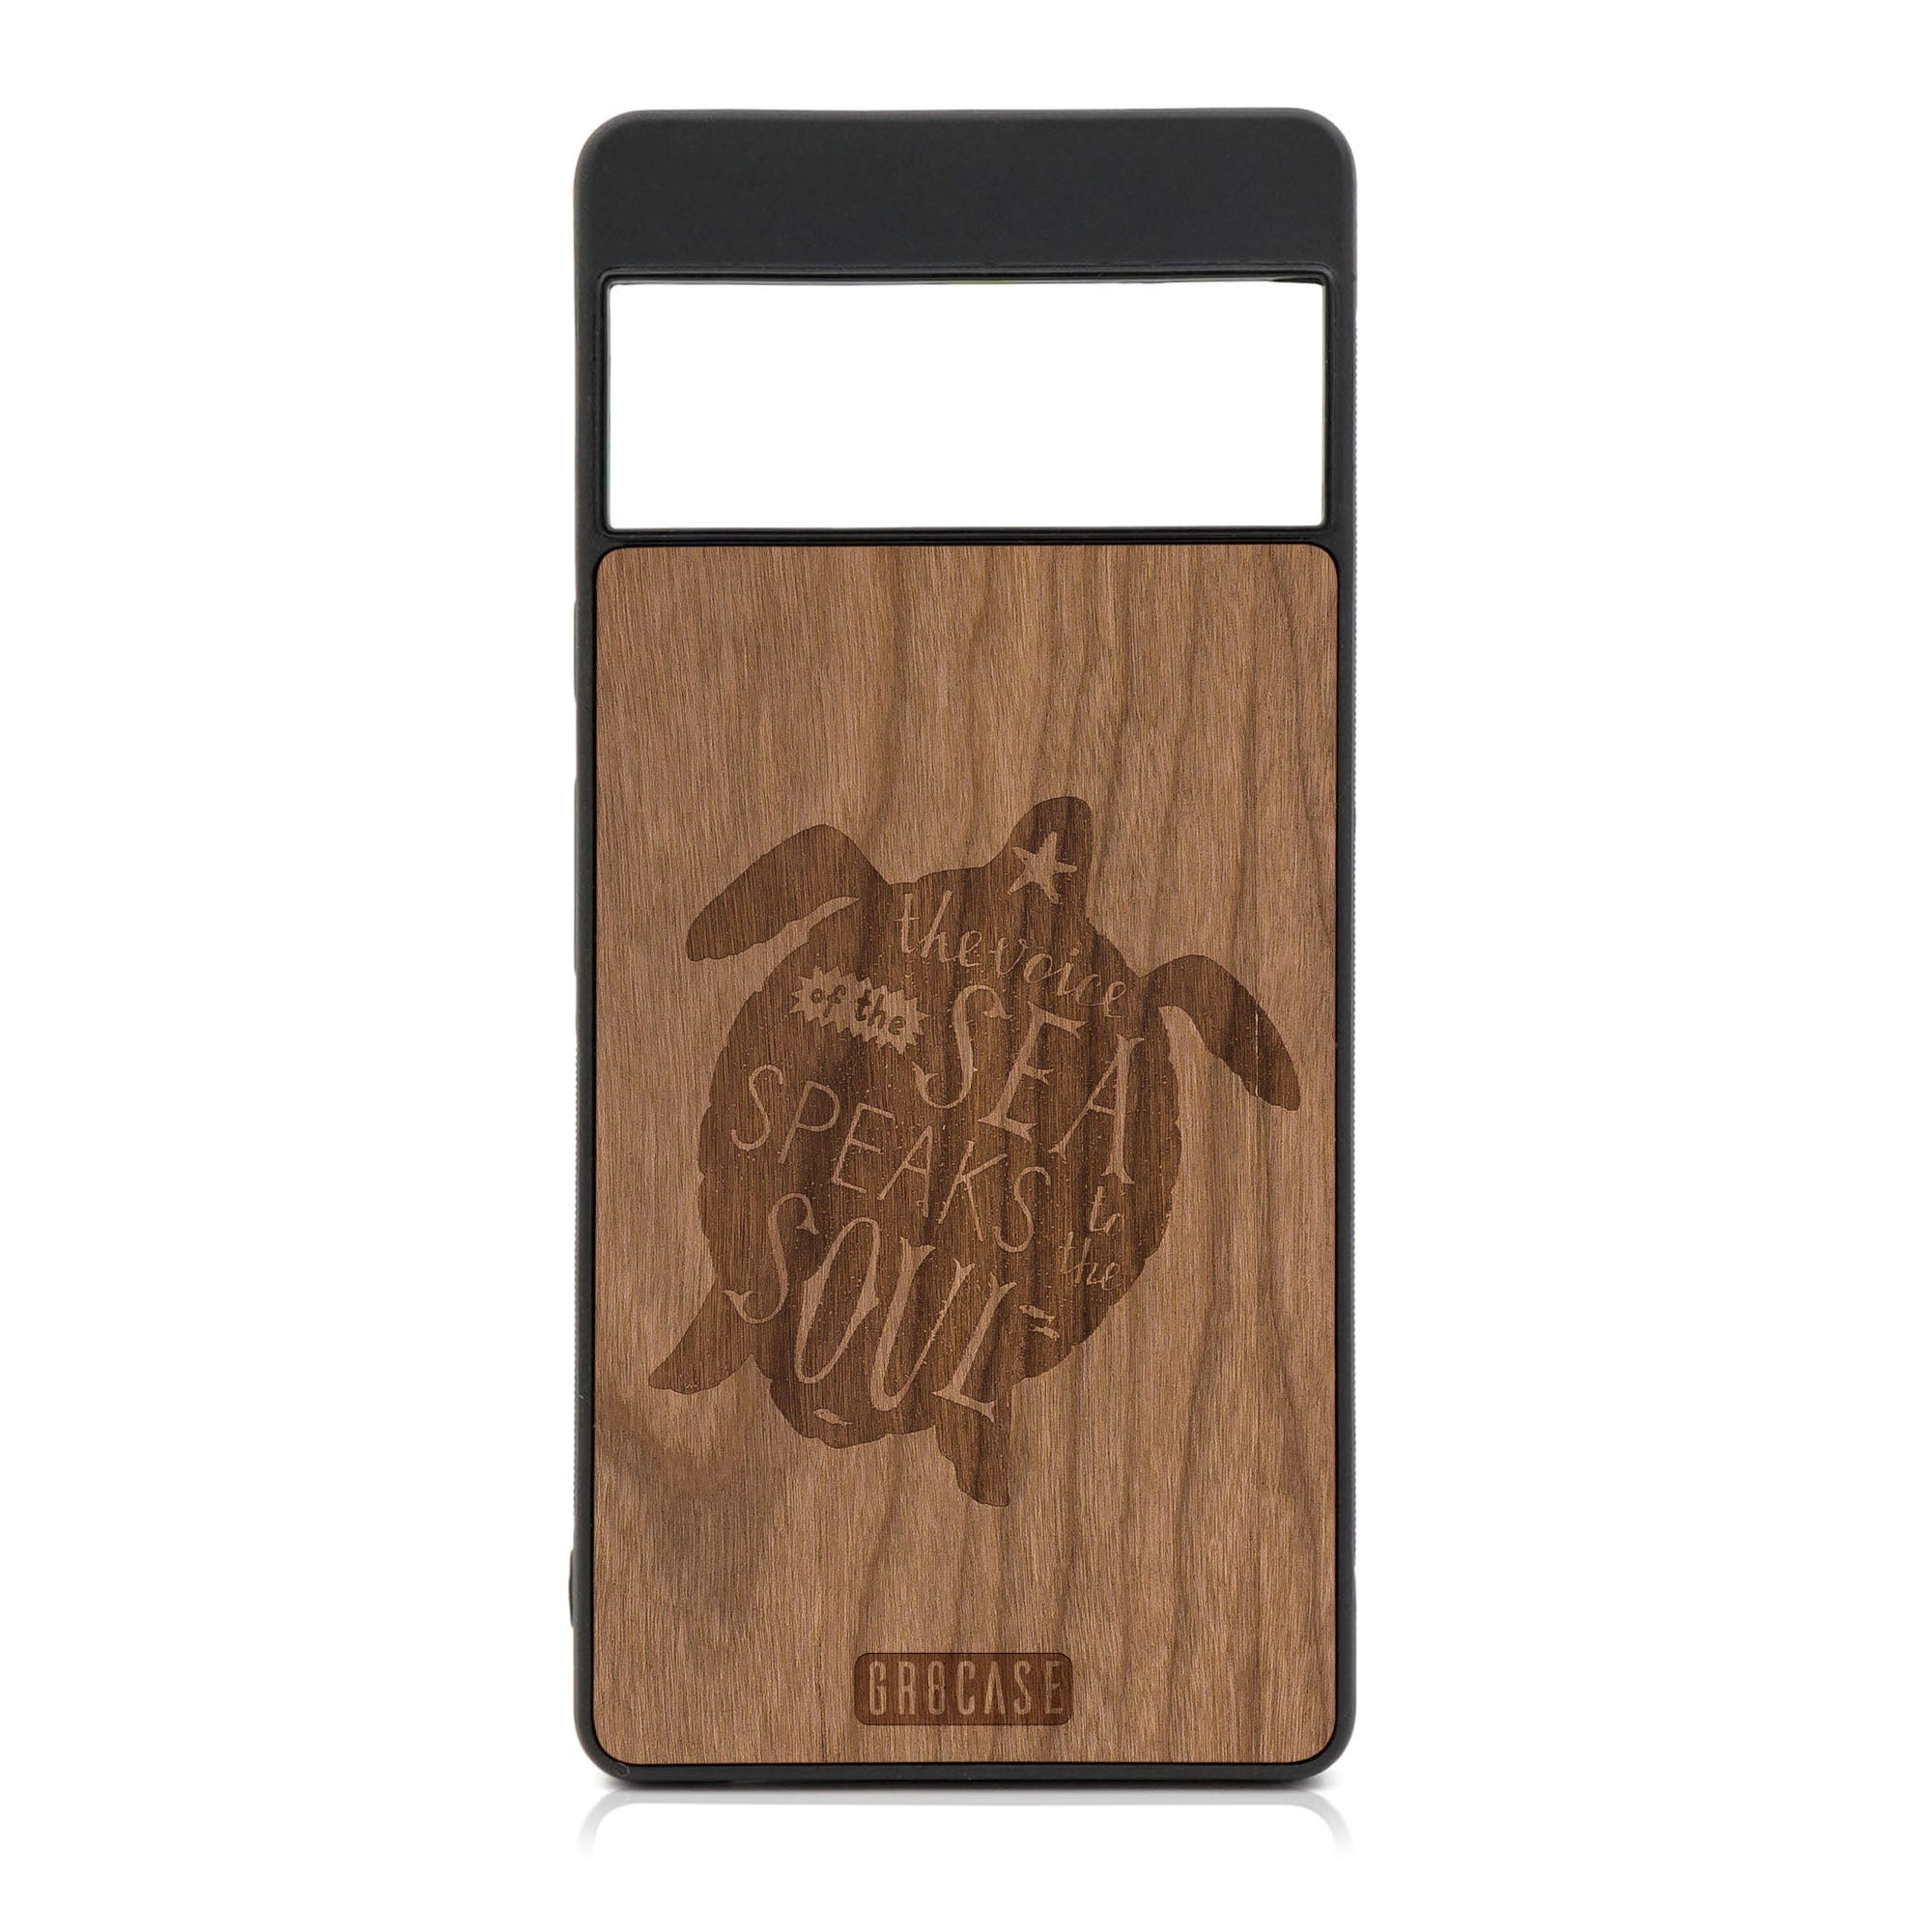 The Voice Of The Sea Speaks To The Soul (Turtle) Design Wood Case For Google Pixel 6 Pro